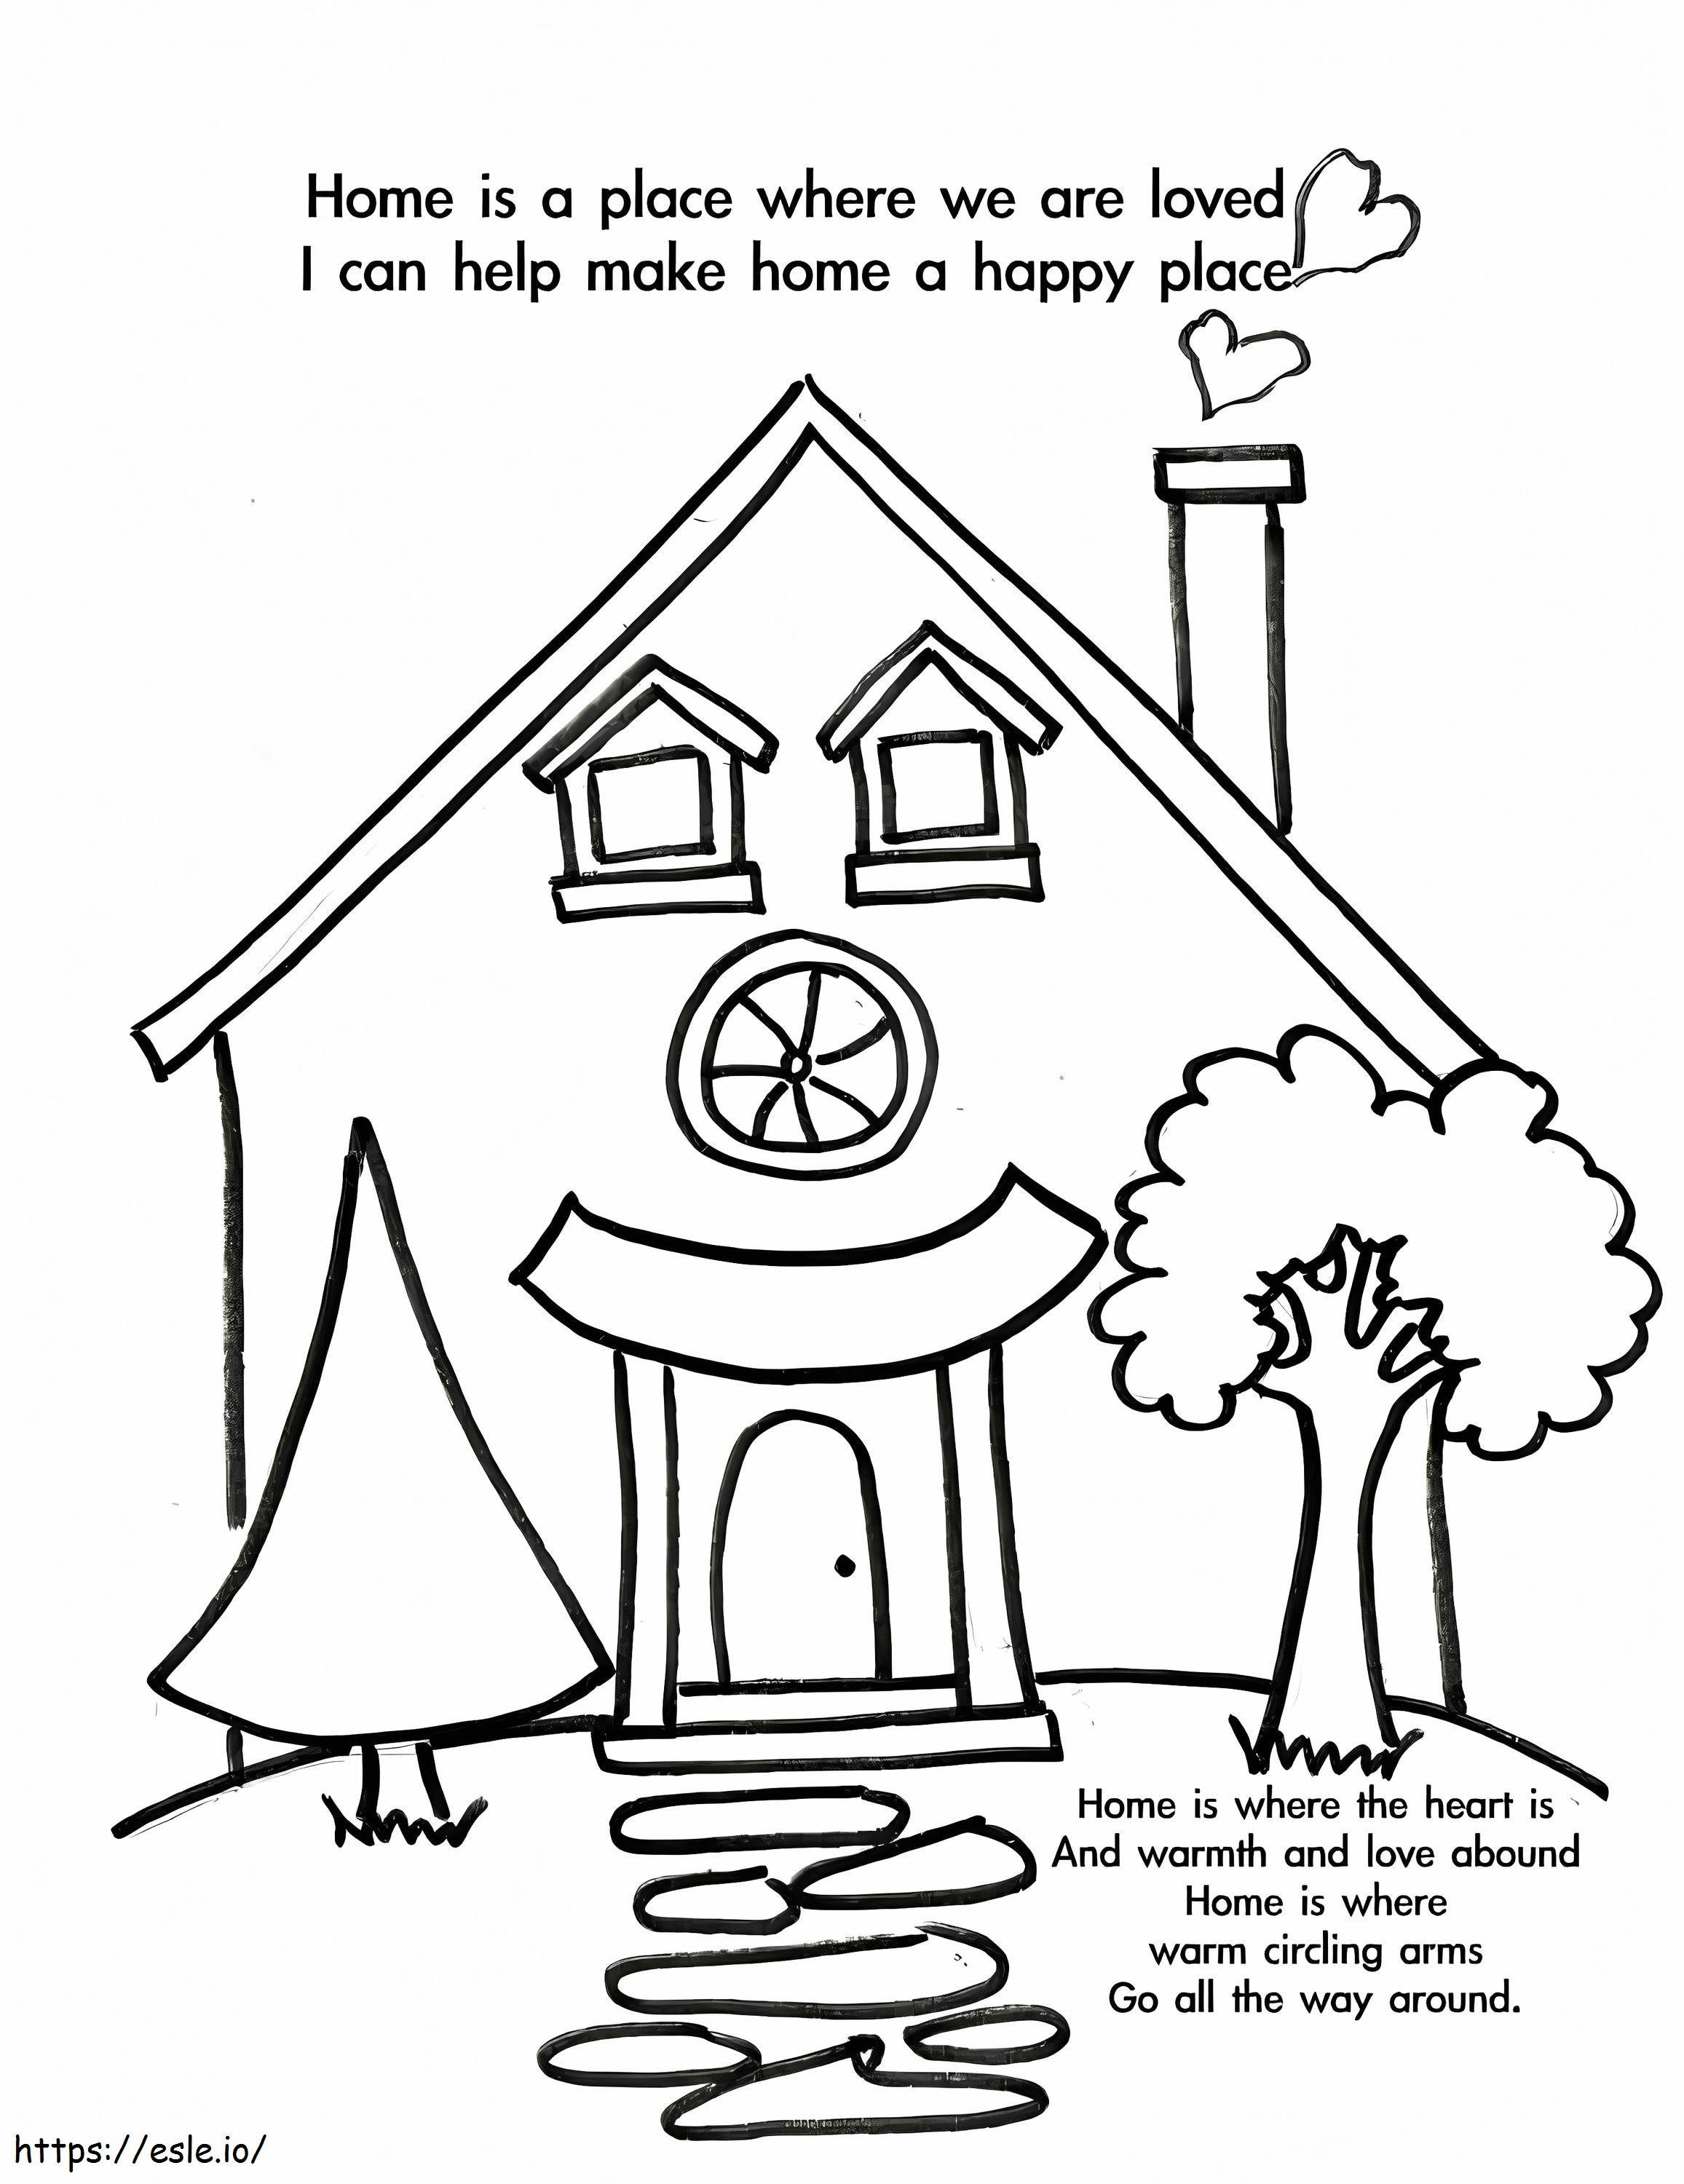 Welcome Home 2 coloring page